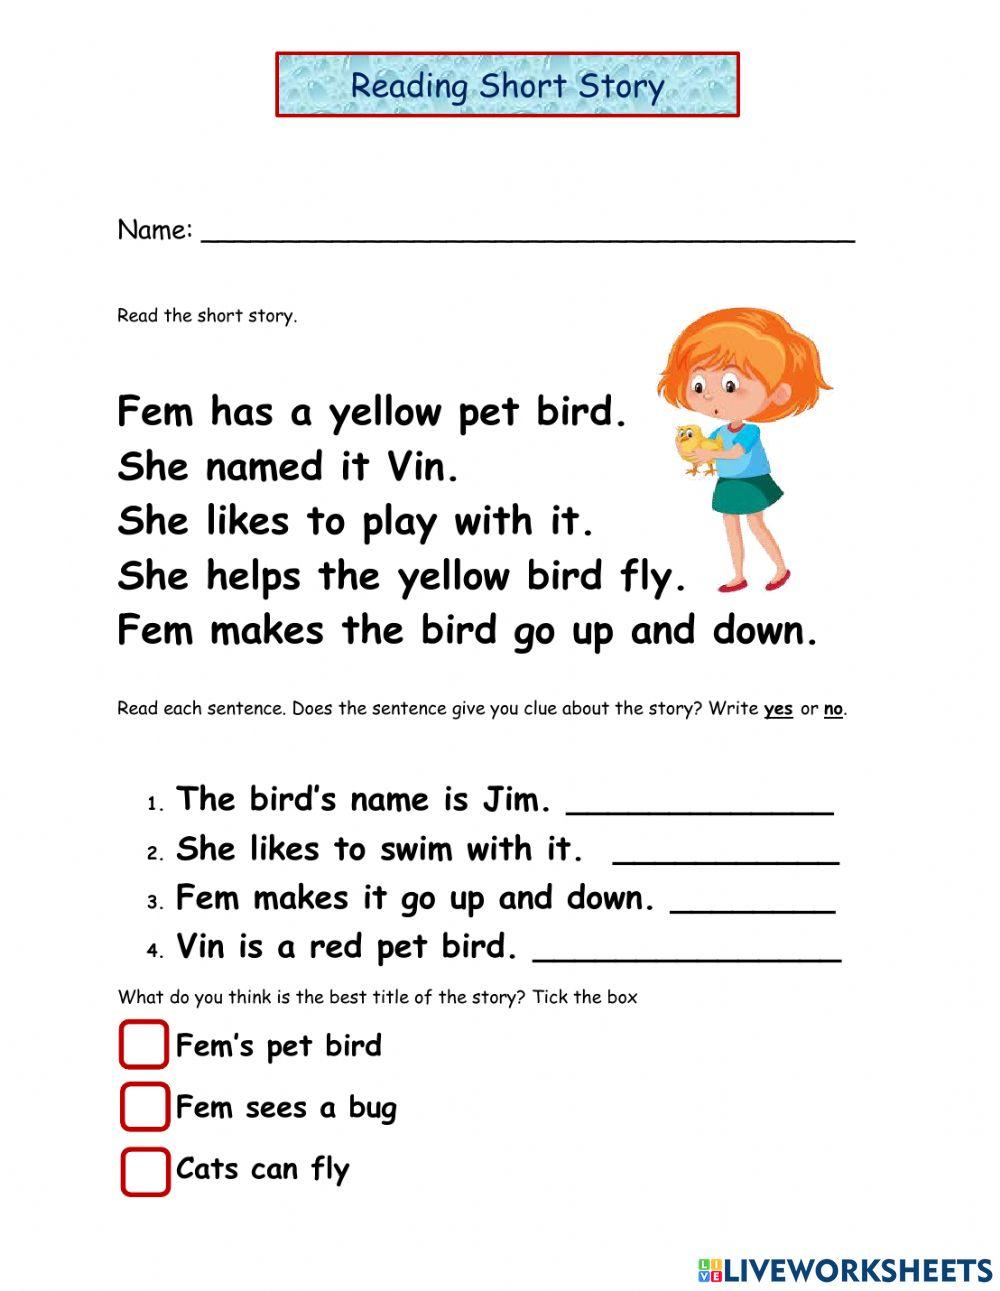 Day 2 Short Story Interactive Activity Live Worksheets